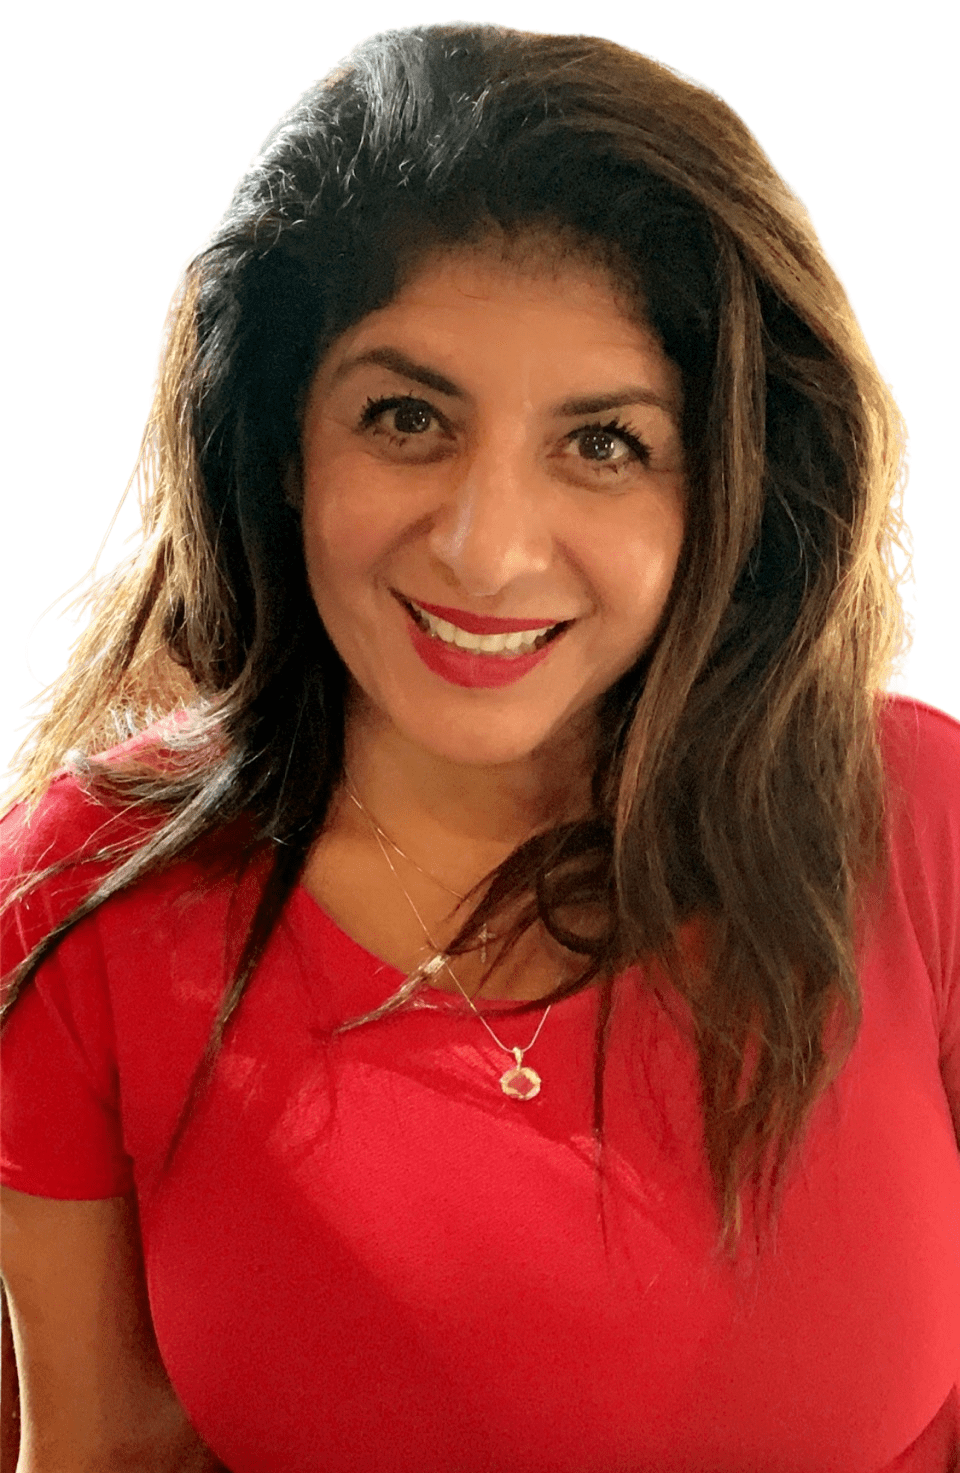 A woman in red shirt smiling for the camera.